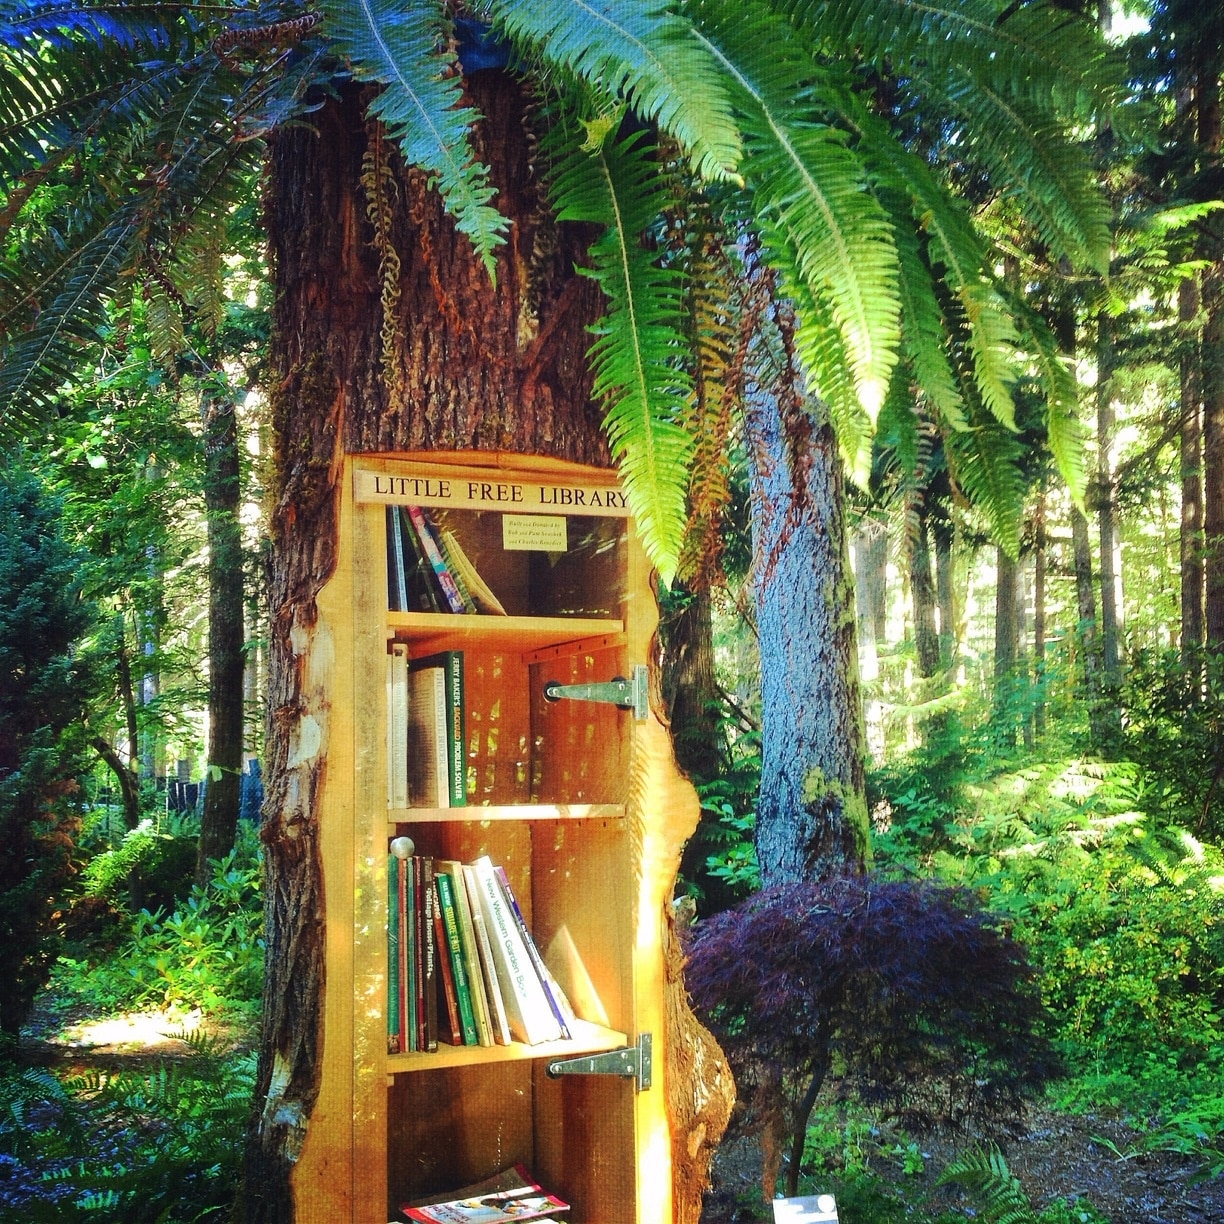 It's a library in a tree! Came across this very clever "Little Free Library" today while hiking at the Lake Wilderness Arboretum in Maple Valley. The nearby bench is a  wonderful place to sit, soak up the serenity of the gardens and browse books left by others. • http://lakewildernessarboretum.org • #MapleValley #Washington #arboretum #gardens #library #hike #localgem